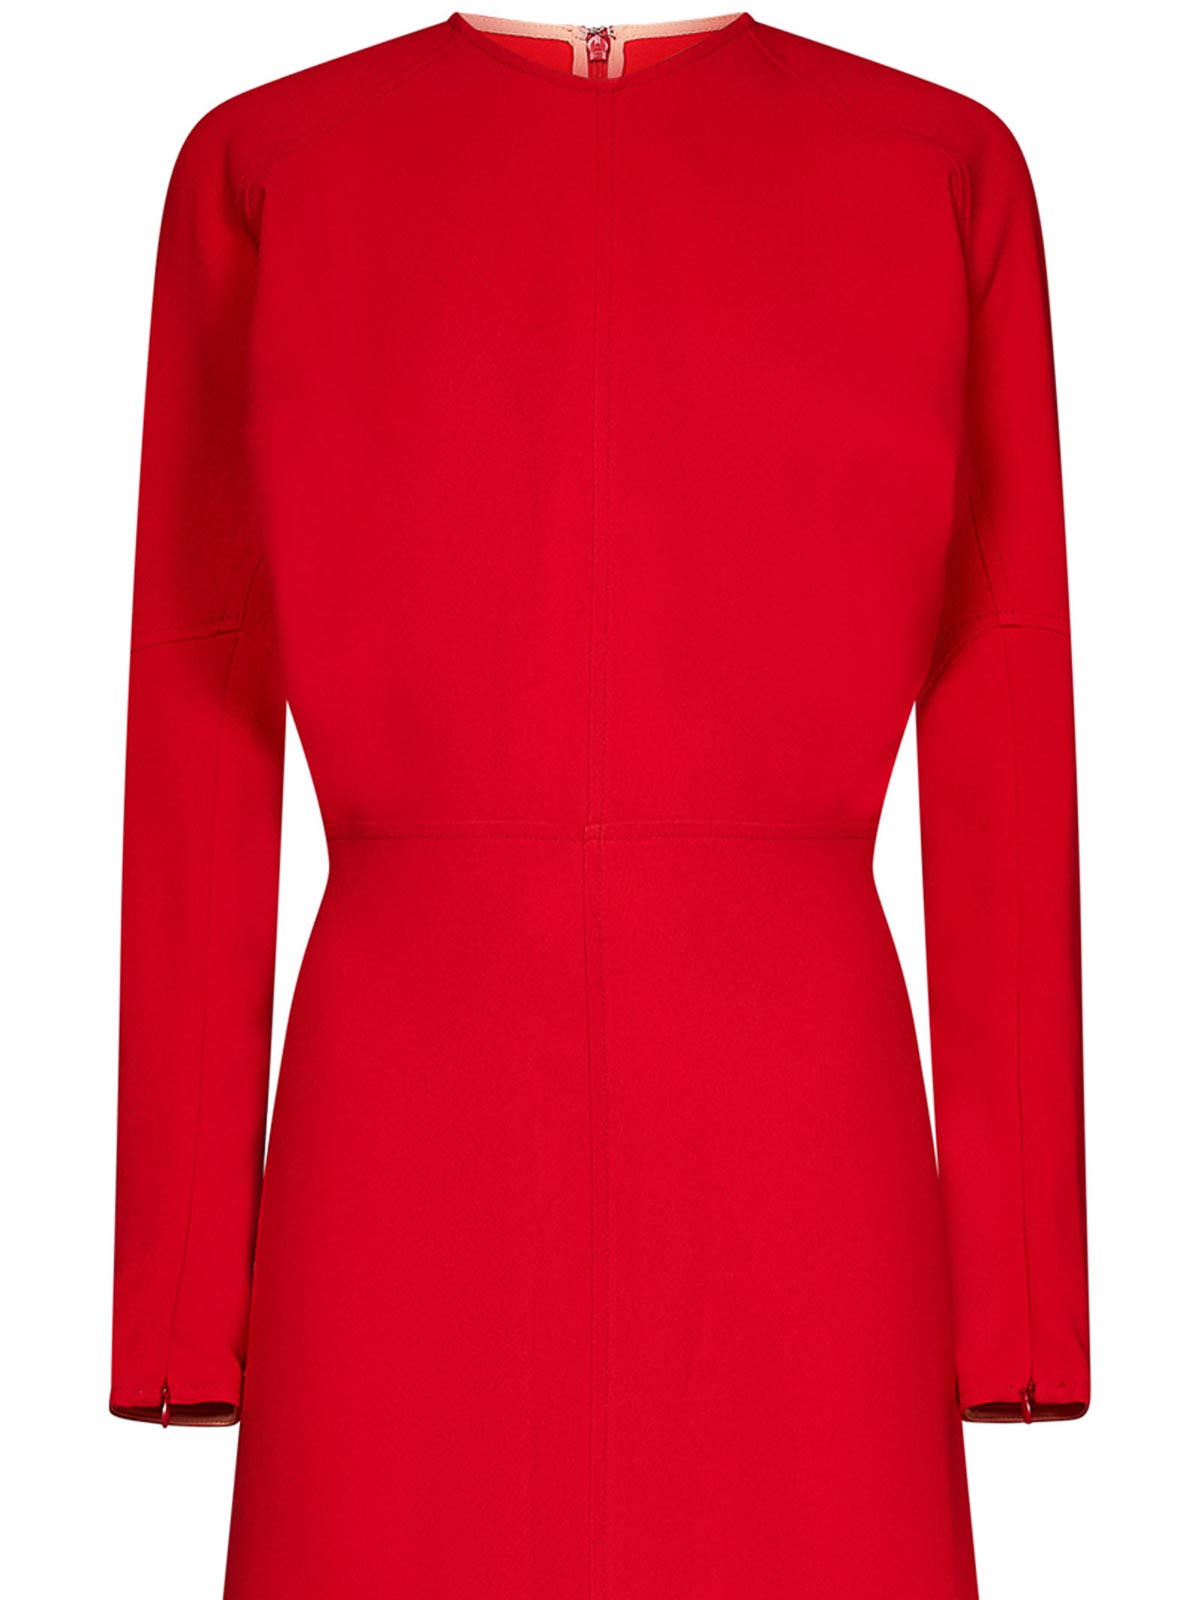 Shop Victoria Beckham Red Cady Midi Dress With Dolman Sleeves